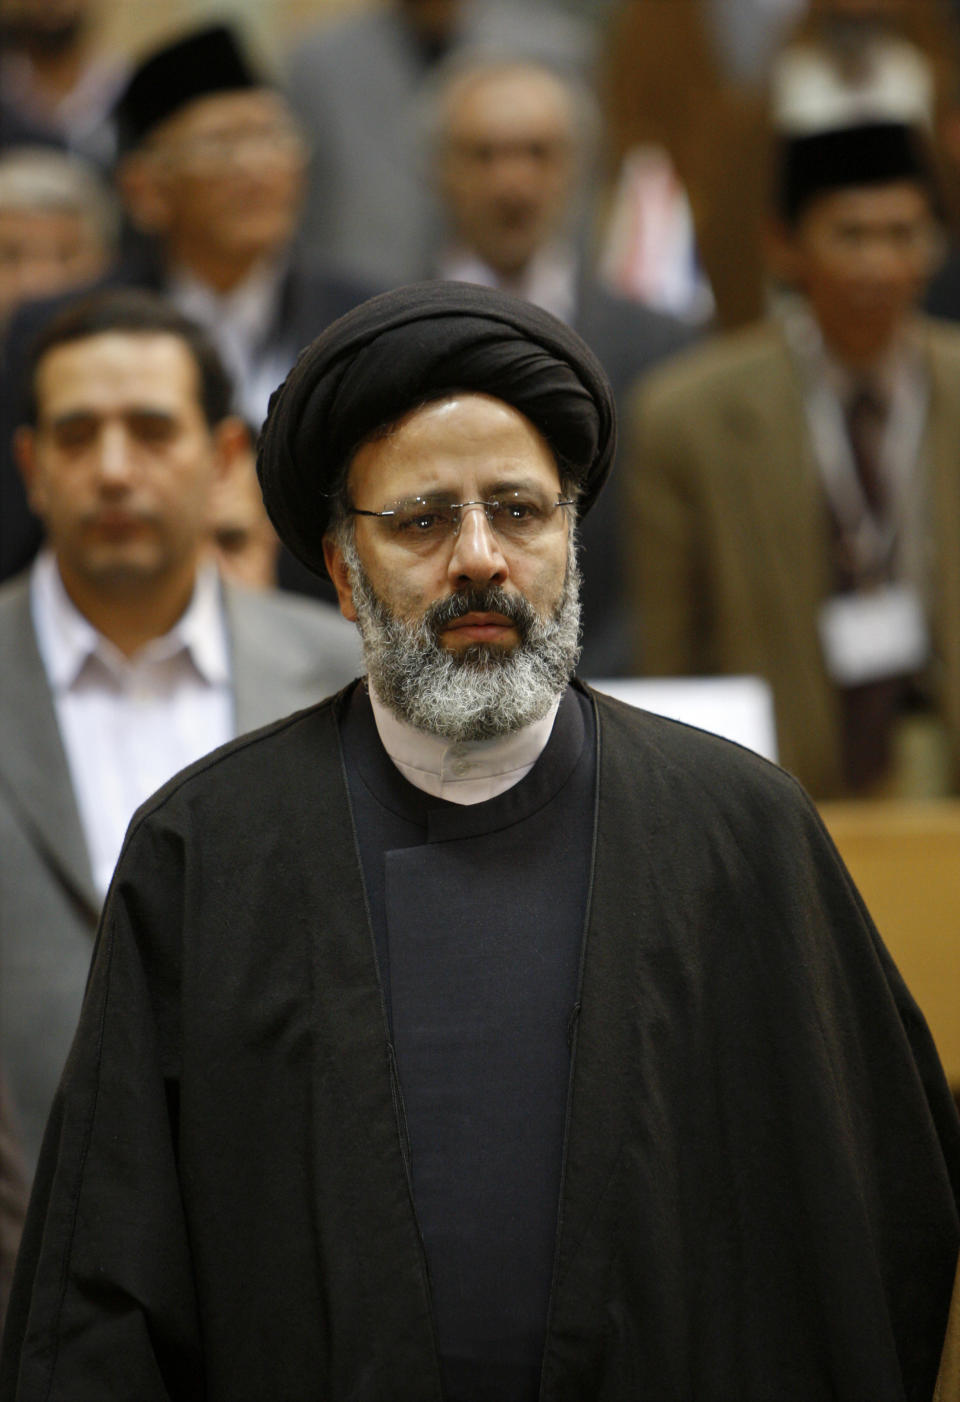 In this April 22, 2009 photo, Ebrahim Raisi attends a meeting of top prosecutors from Islamic countries, in Tehran, Iran. Iran's official IRNA news agency reported Sunday April 9, 2017, that Raisi, a hard-line cleric and close ally of Iran's supreme leader, has announced he will run in the May presidential election. (AP Photo/Vahid Salemi)